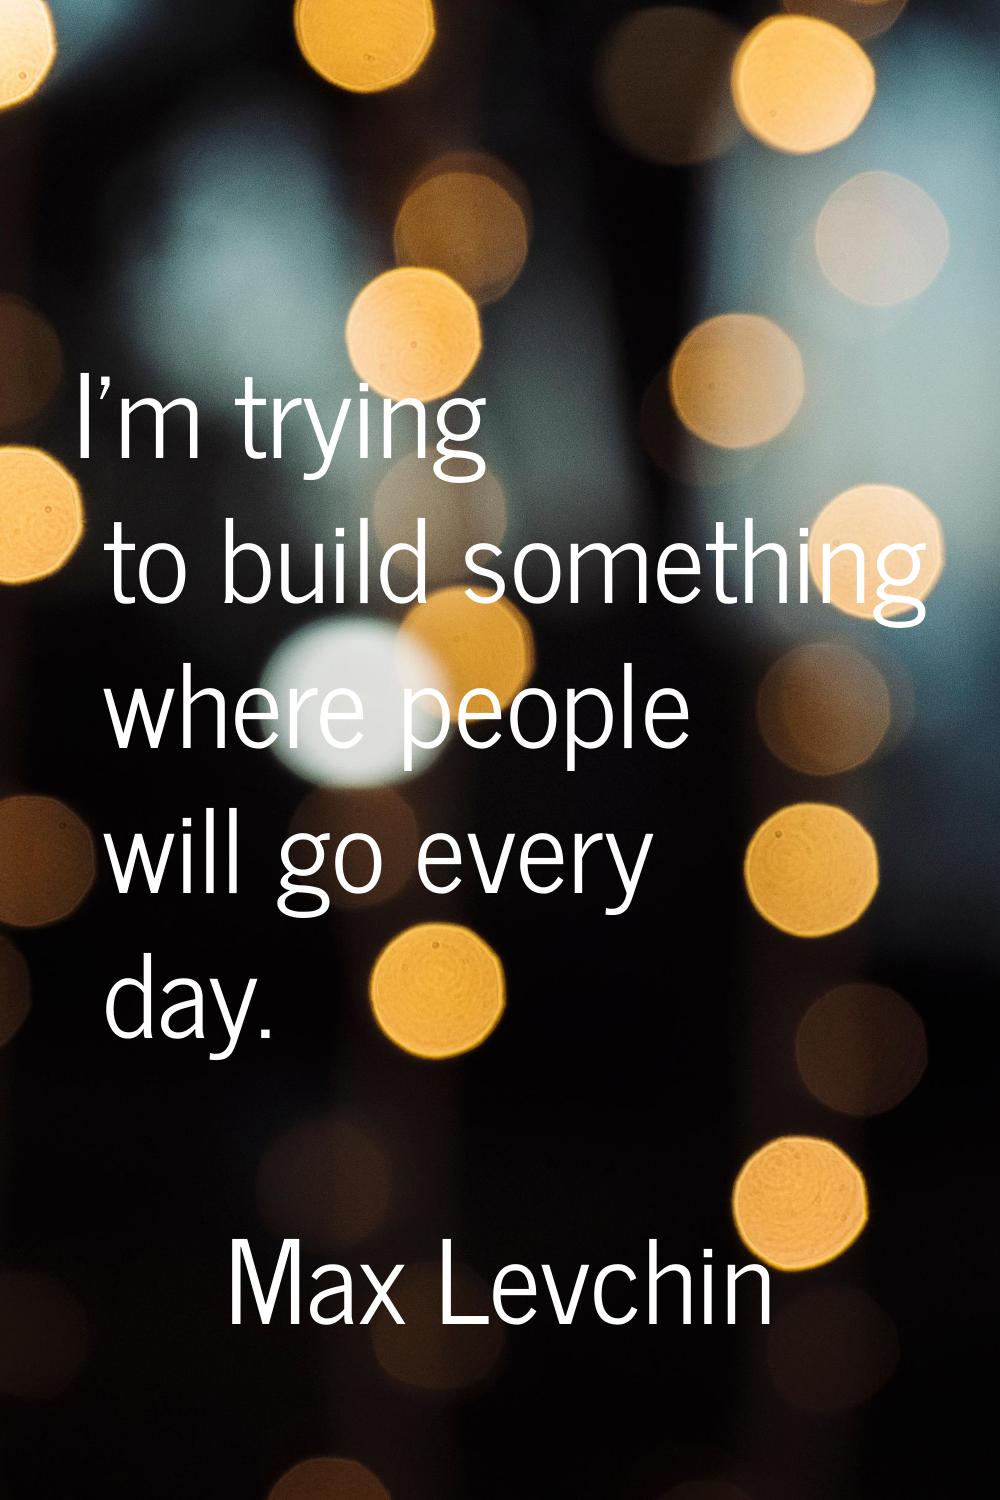 I'm trying to build something where people will go every day.